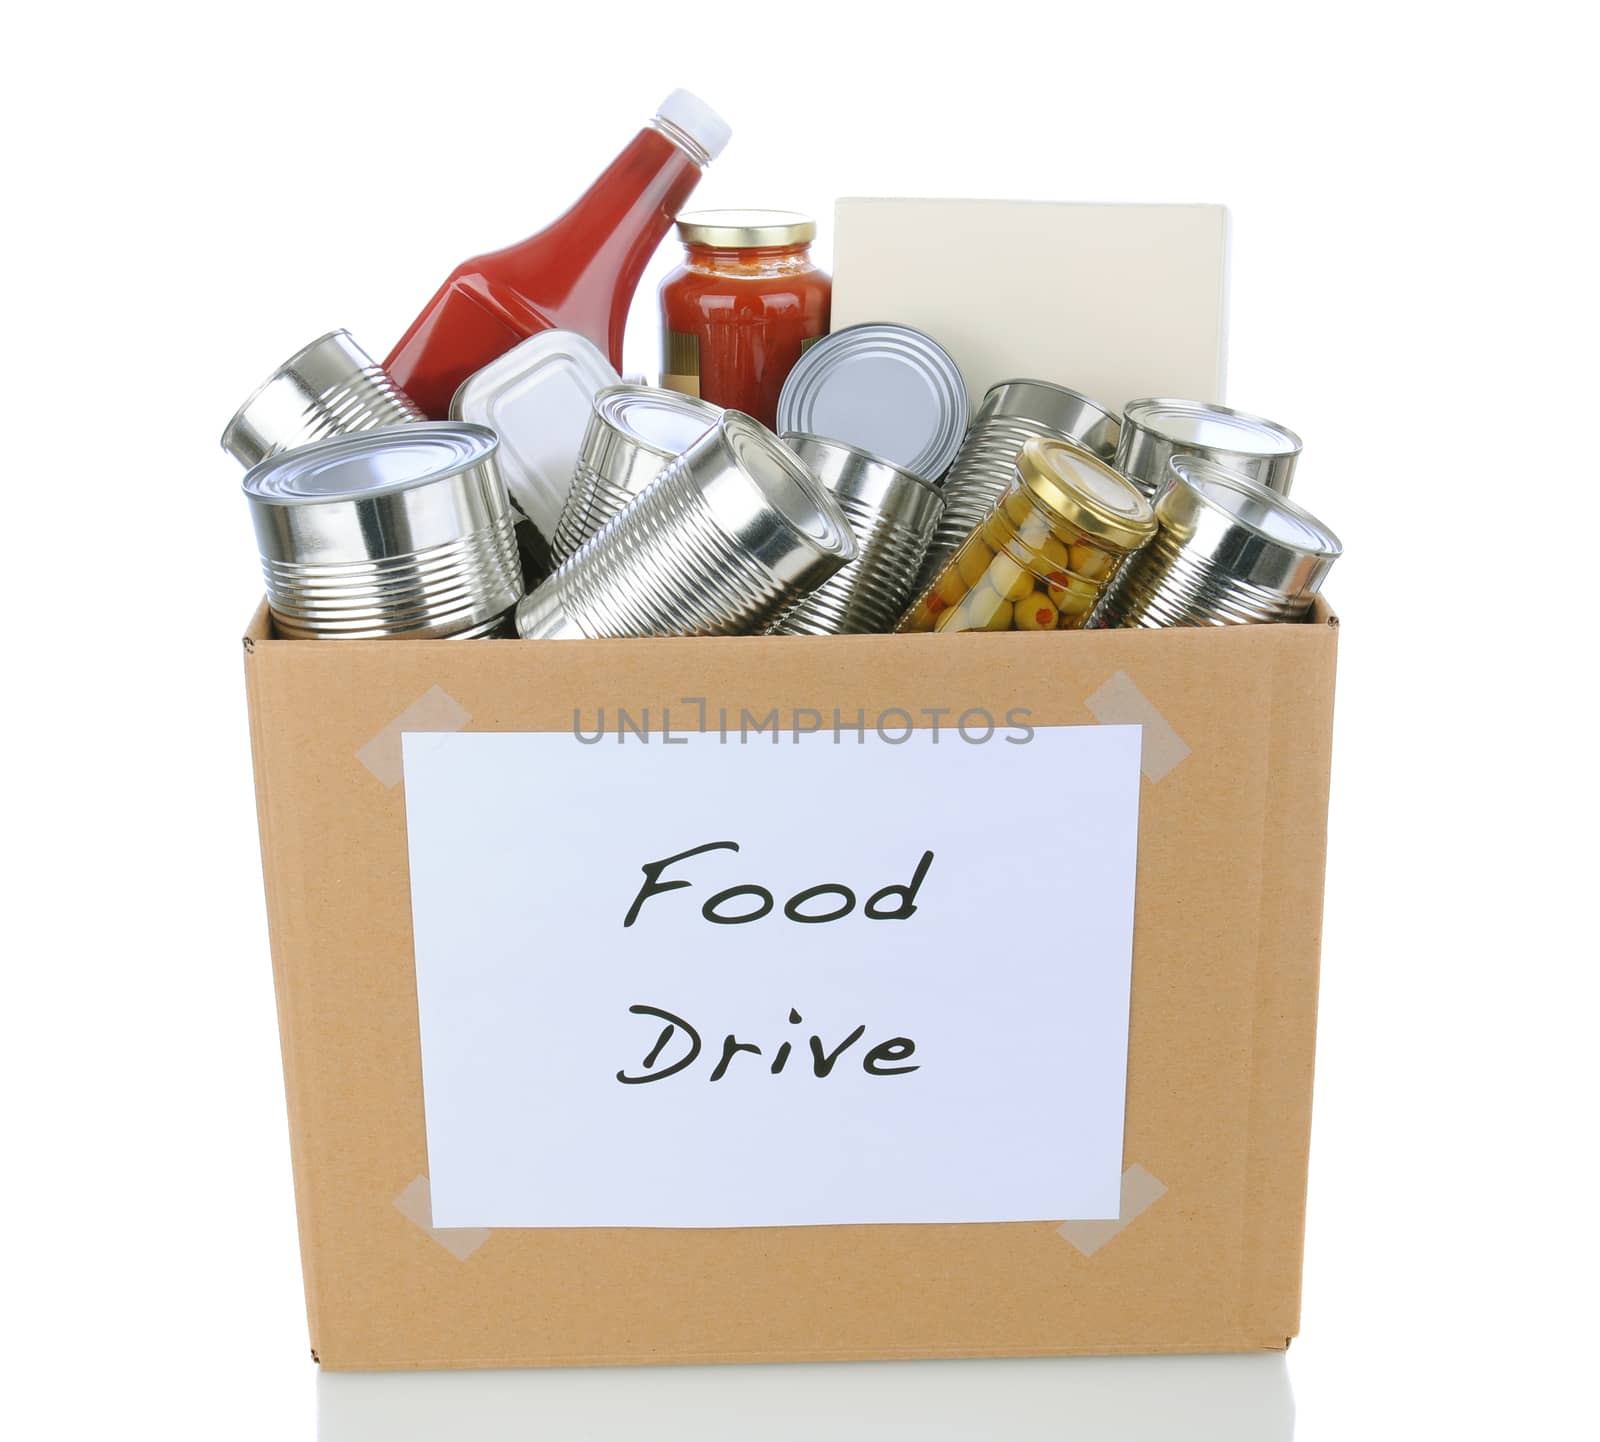 A box full of canned and packaged foodstuff for a charity food donation drive. Isolated on white with reflection.